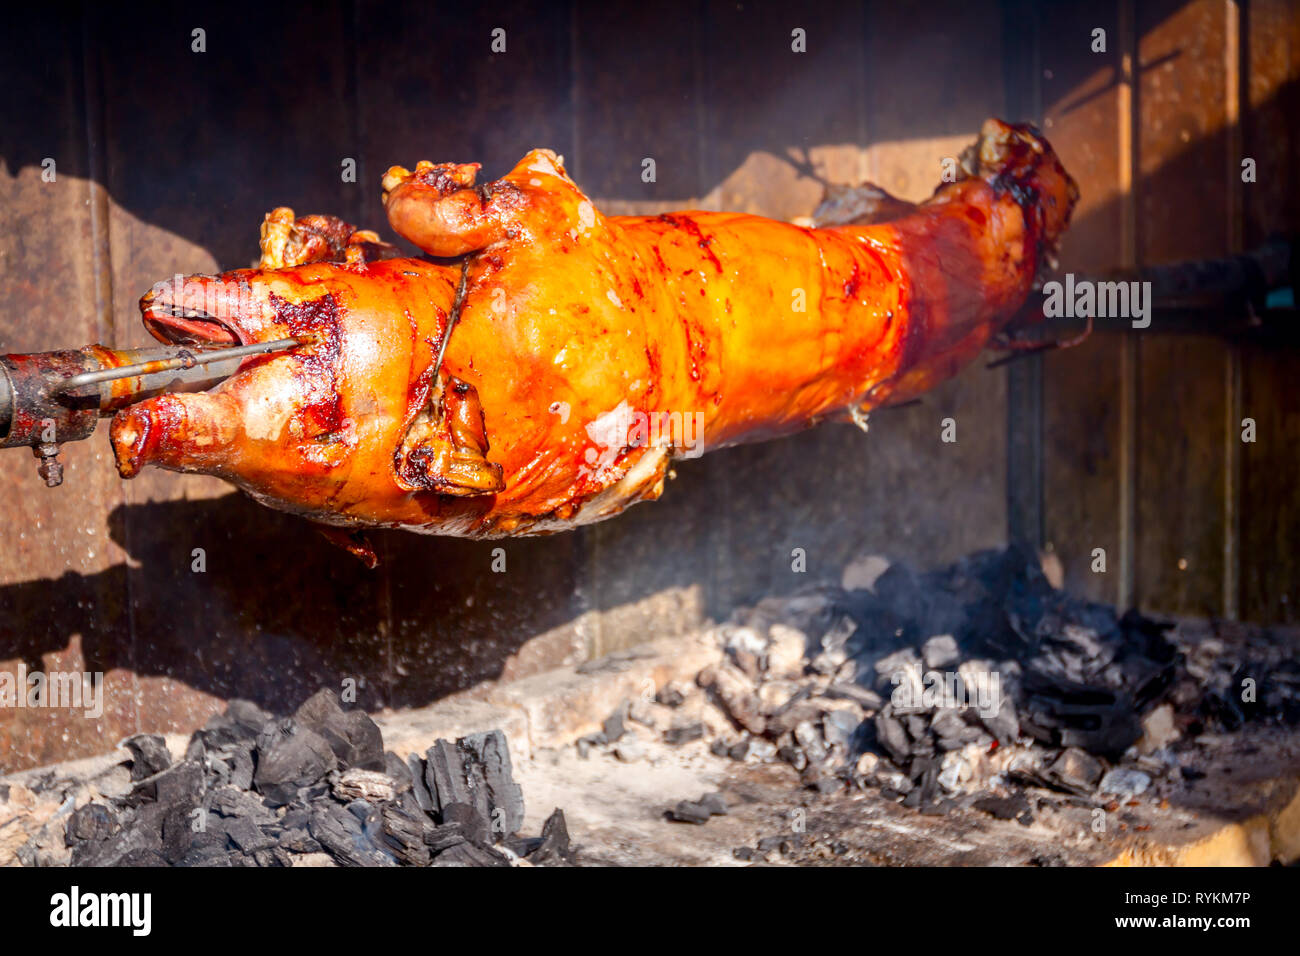 Pig is being grilled slowly on spit in traditional way, cooked with charcoal, fatty roasted meat Stock Photo